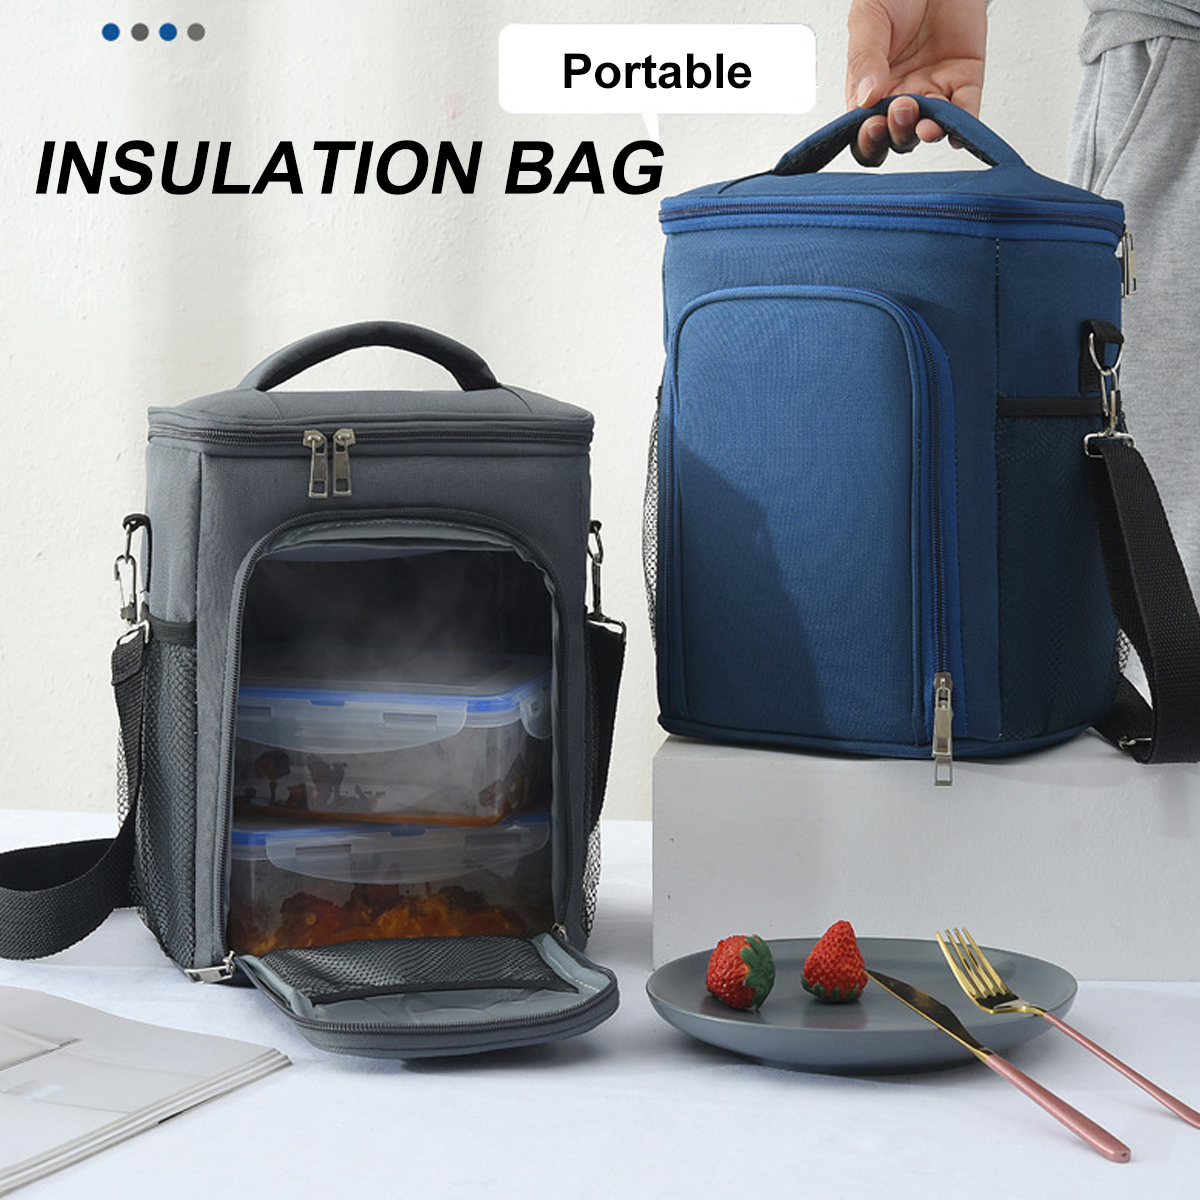 14L-Insulated-Picnic-Bag-Carry-Lunch-Bag-Thermal-Handbag-Outdoor-Camping-Travel-1872425-7